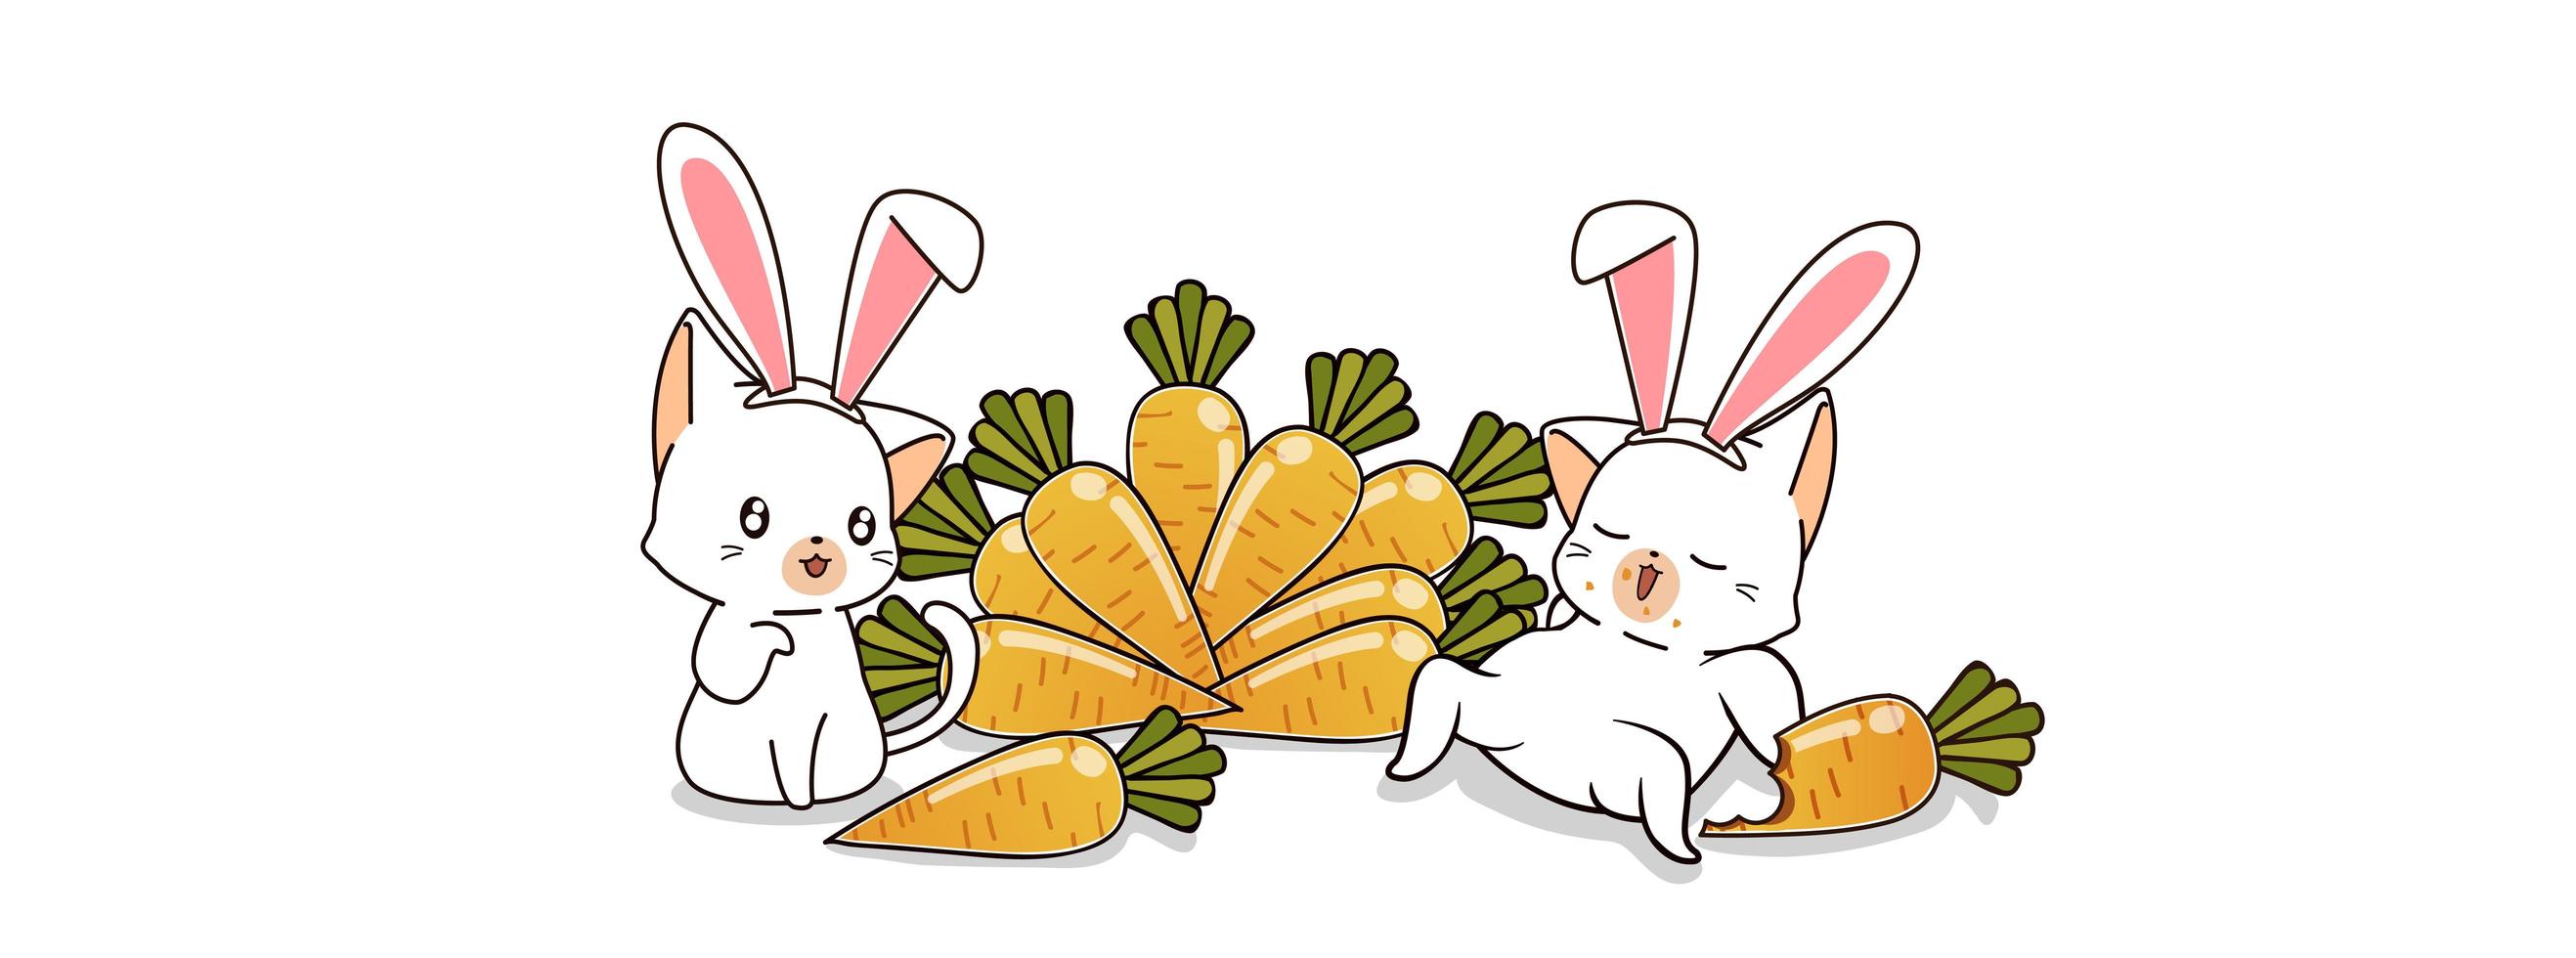 2 bunny cats and carrots vector